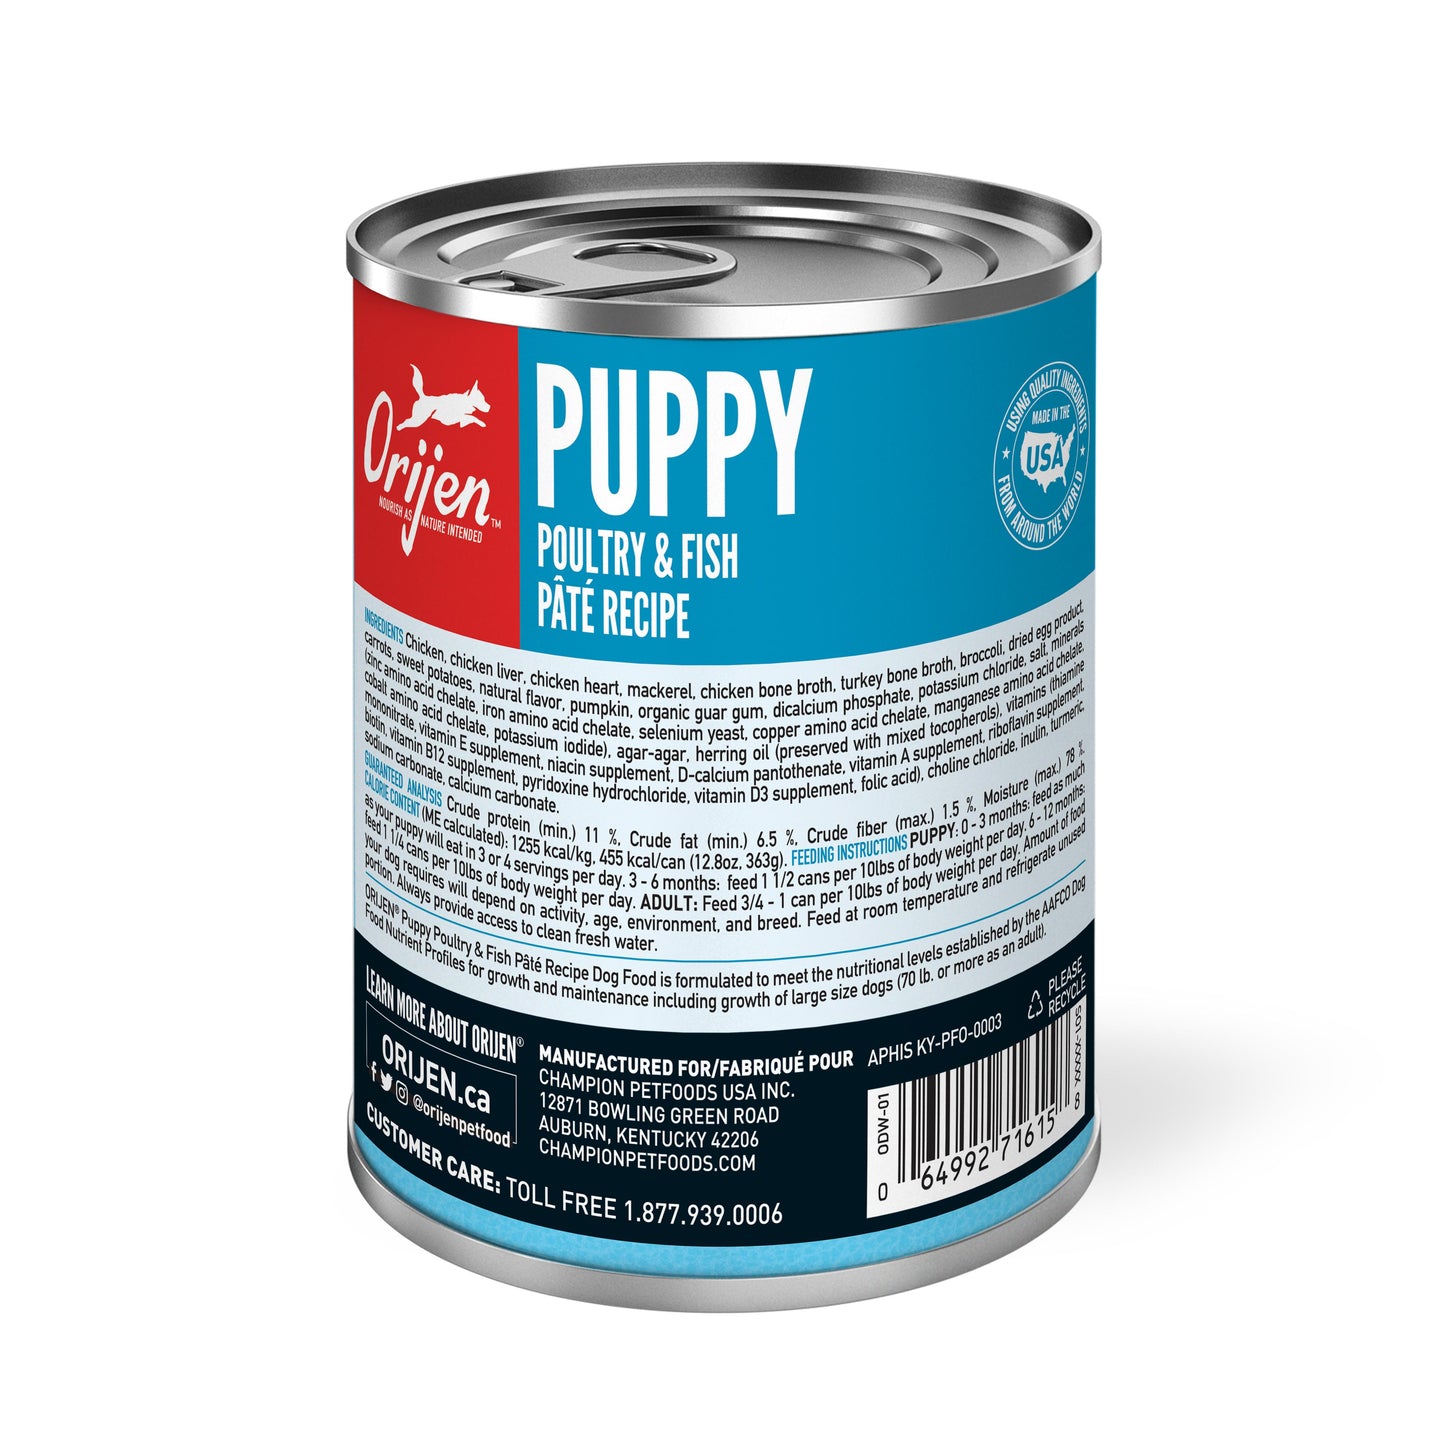 Orijen Premium Canned Puppy Food | Poultry & Fish Pate Recipe | 12.8 oz. Can